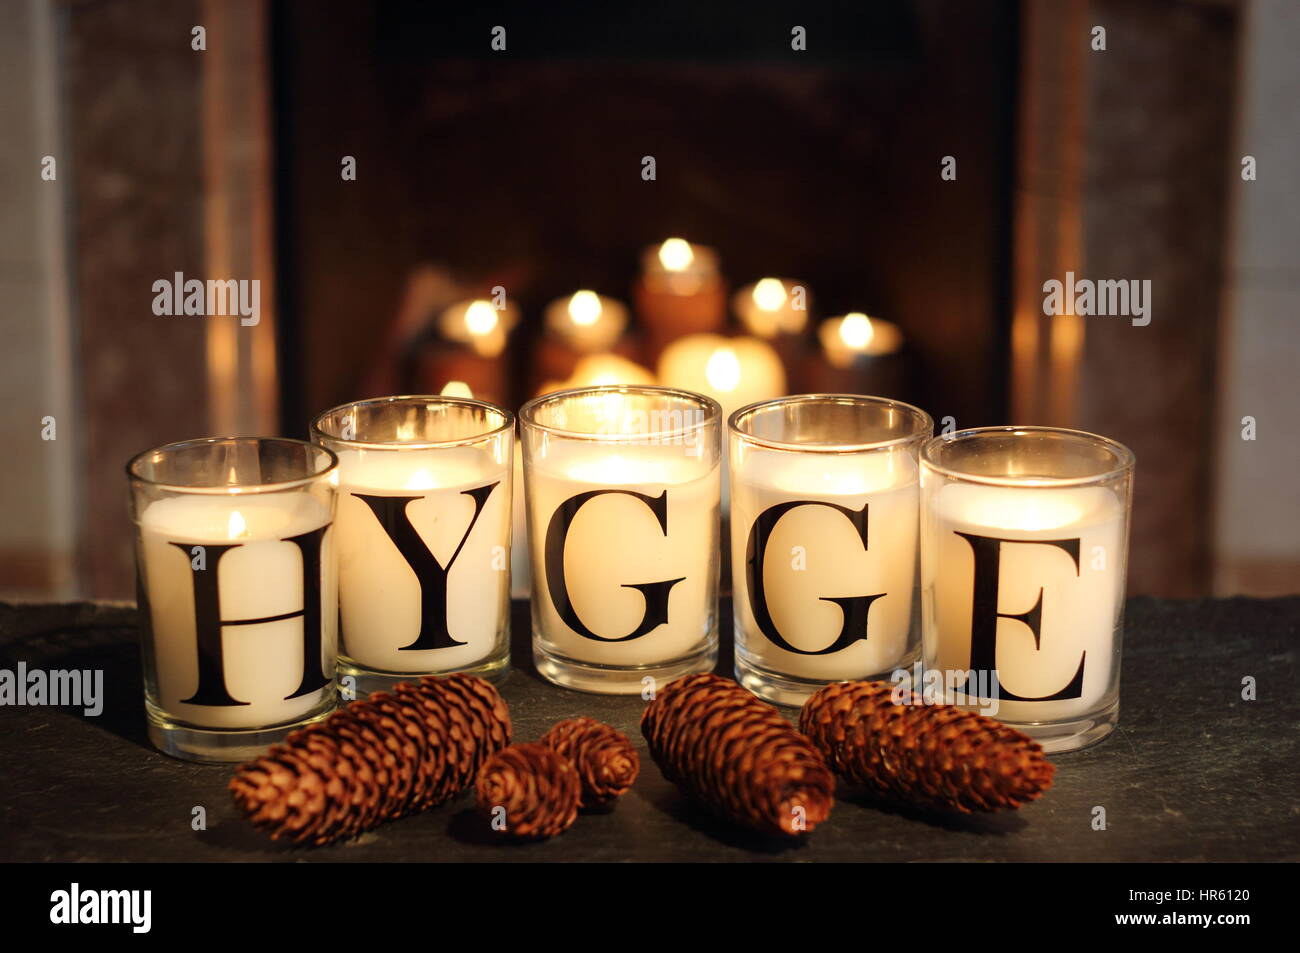 Fireside candles in an English home in winter depict 'hygge' - the Danish concept of embracing cosy contentment and conviviality Stock Photo